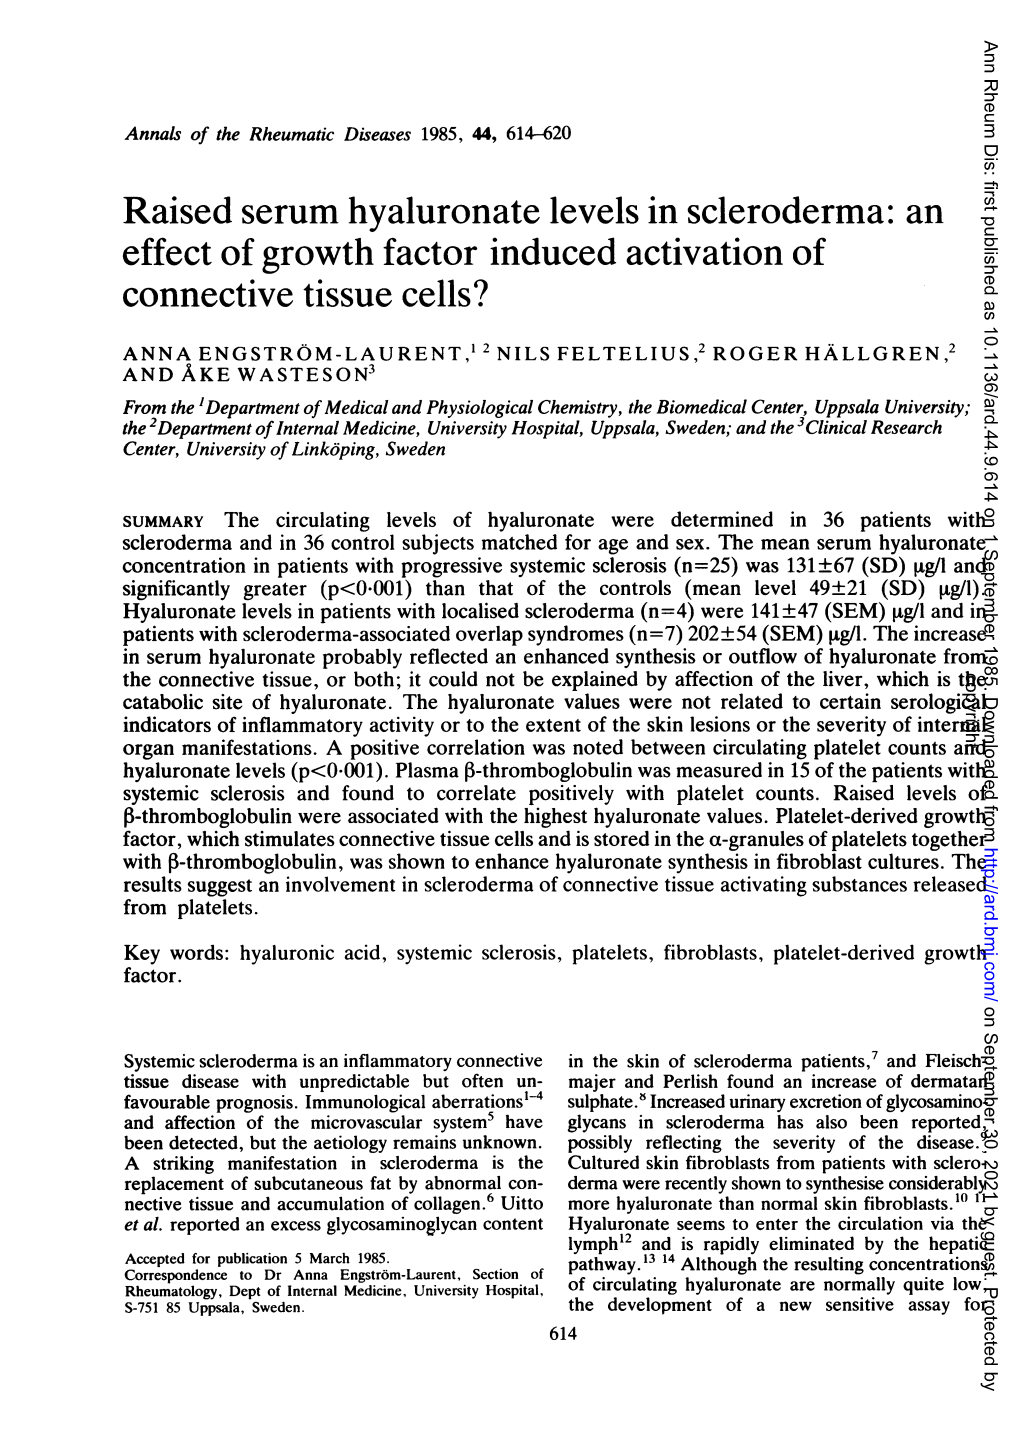 Raised Serum Hyaluronate Levels in Scleroderma: an Effect of Growth Factor Induced Activation of Connective Tissue Cells?